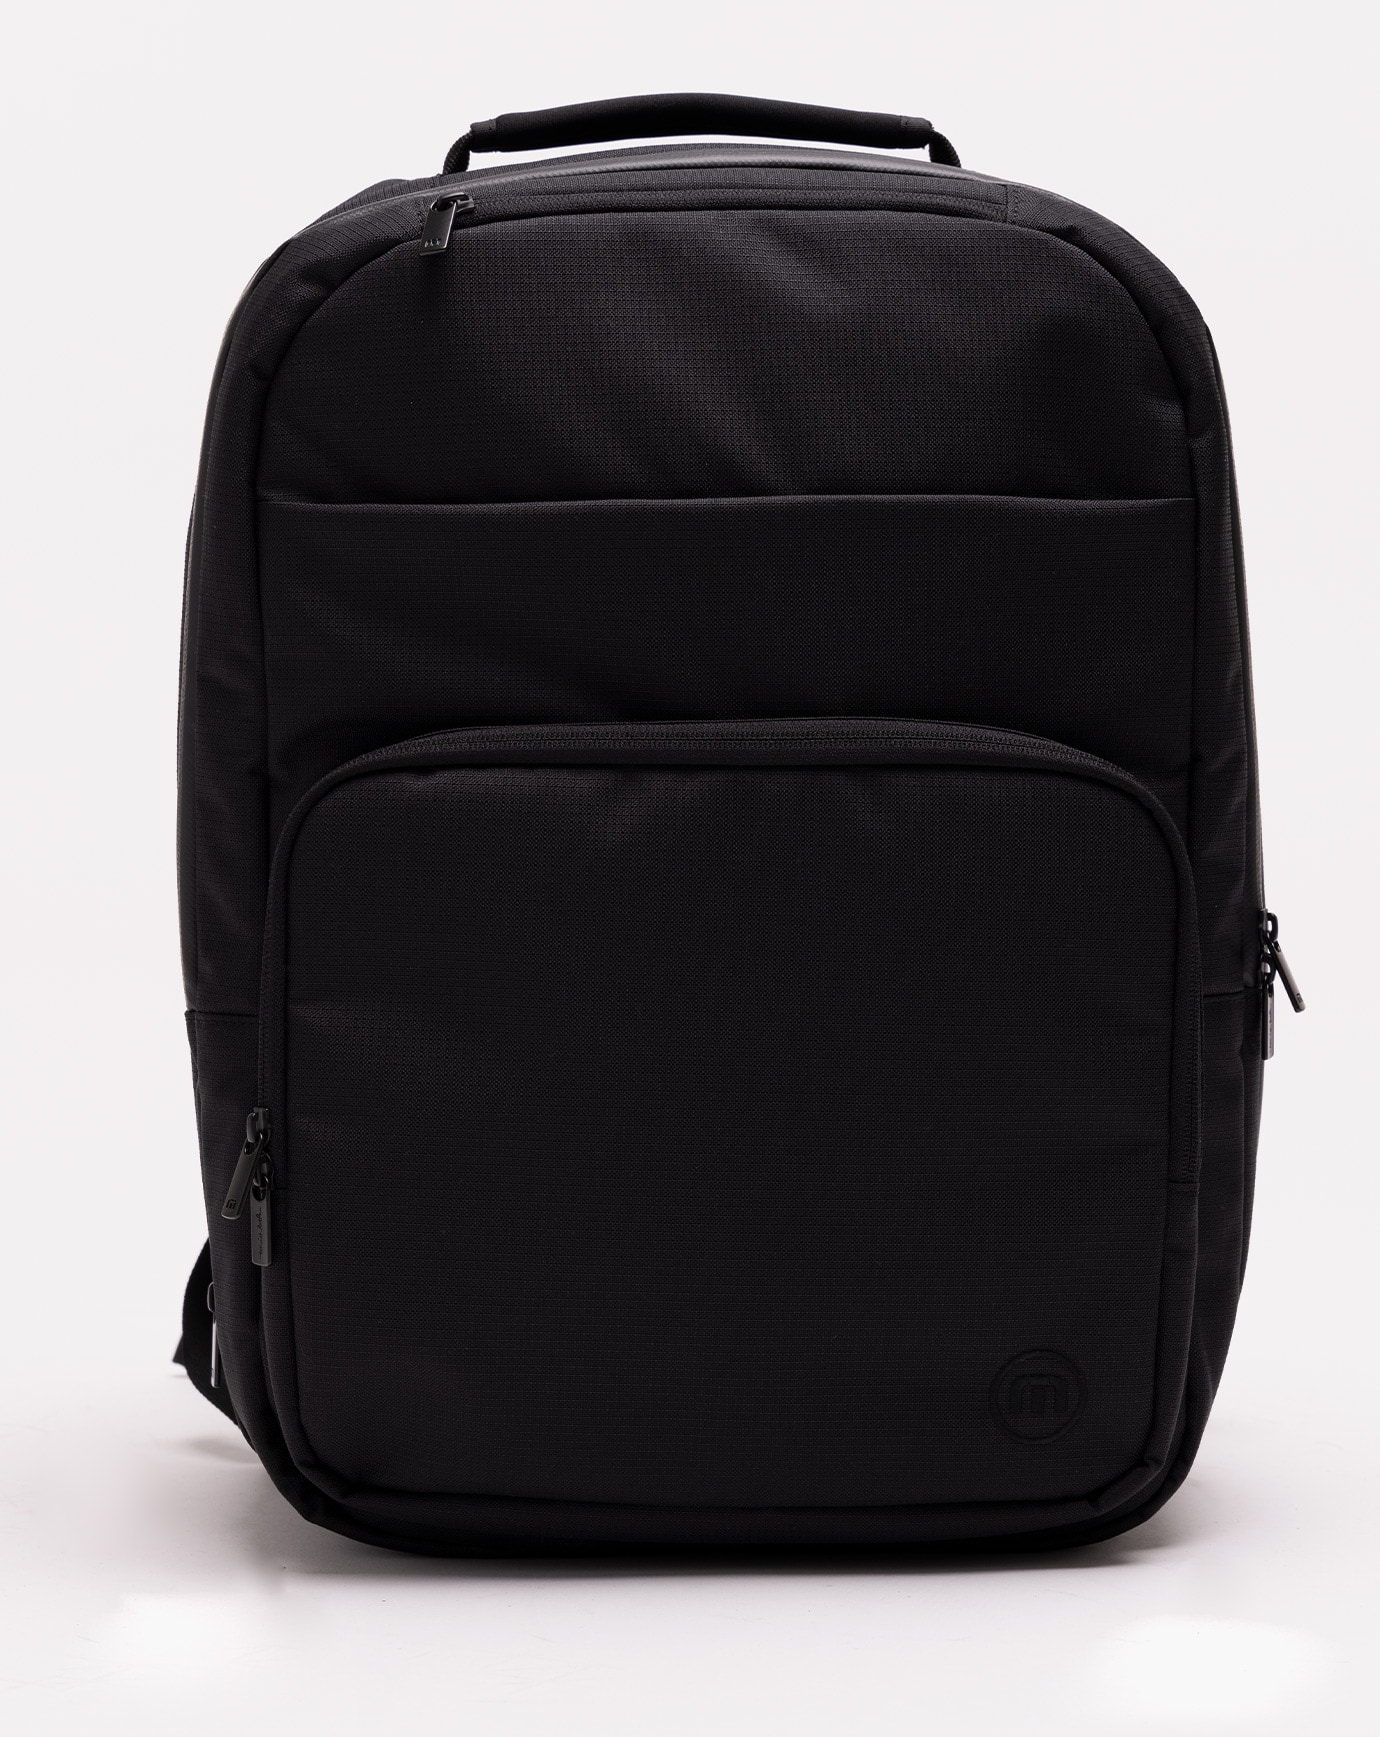 1st Class Backpack